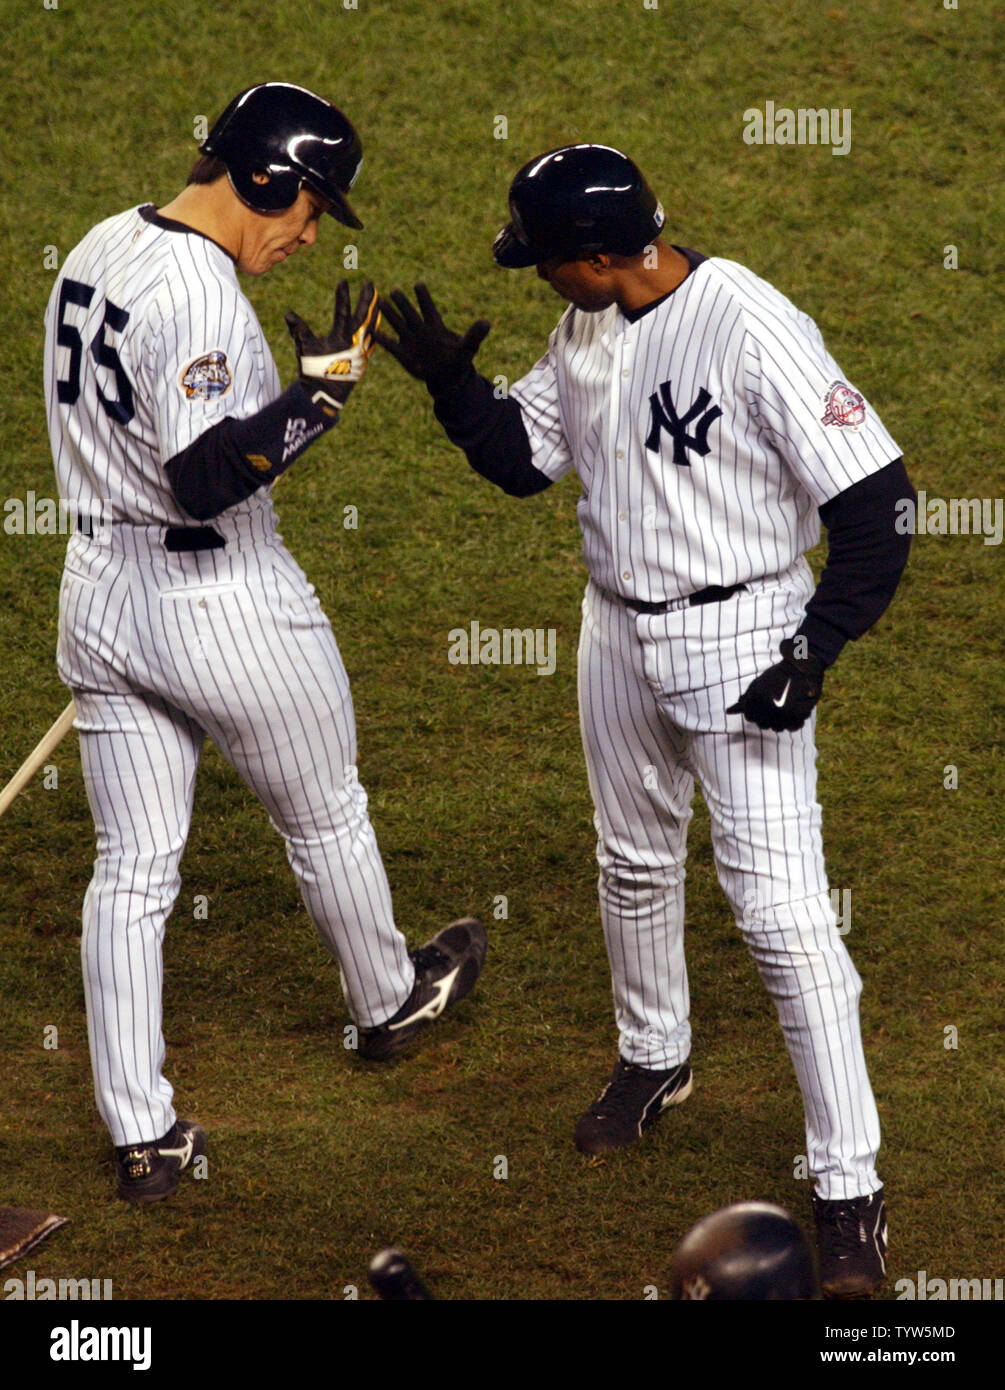 The New York Yankees' Bernie Williams, right, is congratulated by team mate Hideki Matsui after Williams hit a solo home run in the sixth inning against the Florida Marlins in Game 1 of the World Series at Yankee Stadium on October 18, 2003. The Marlins won 3-2.  (UPI/Roger L. Wollenberg) Stock Photo